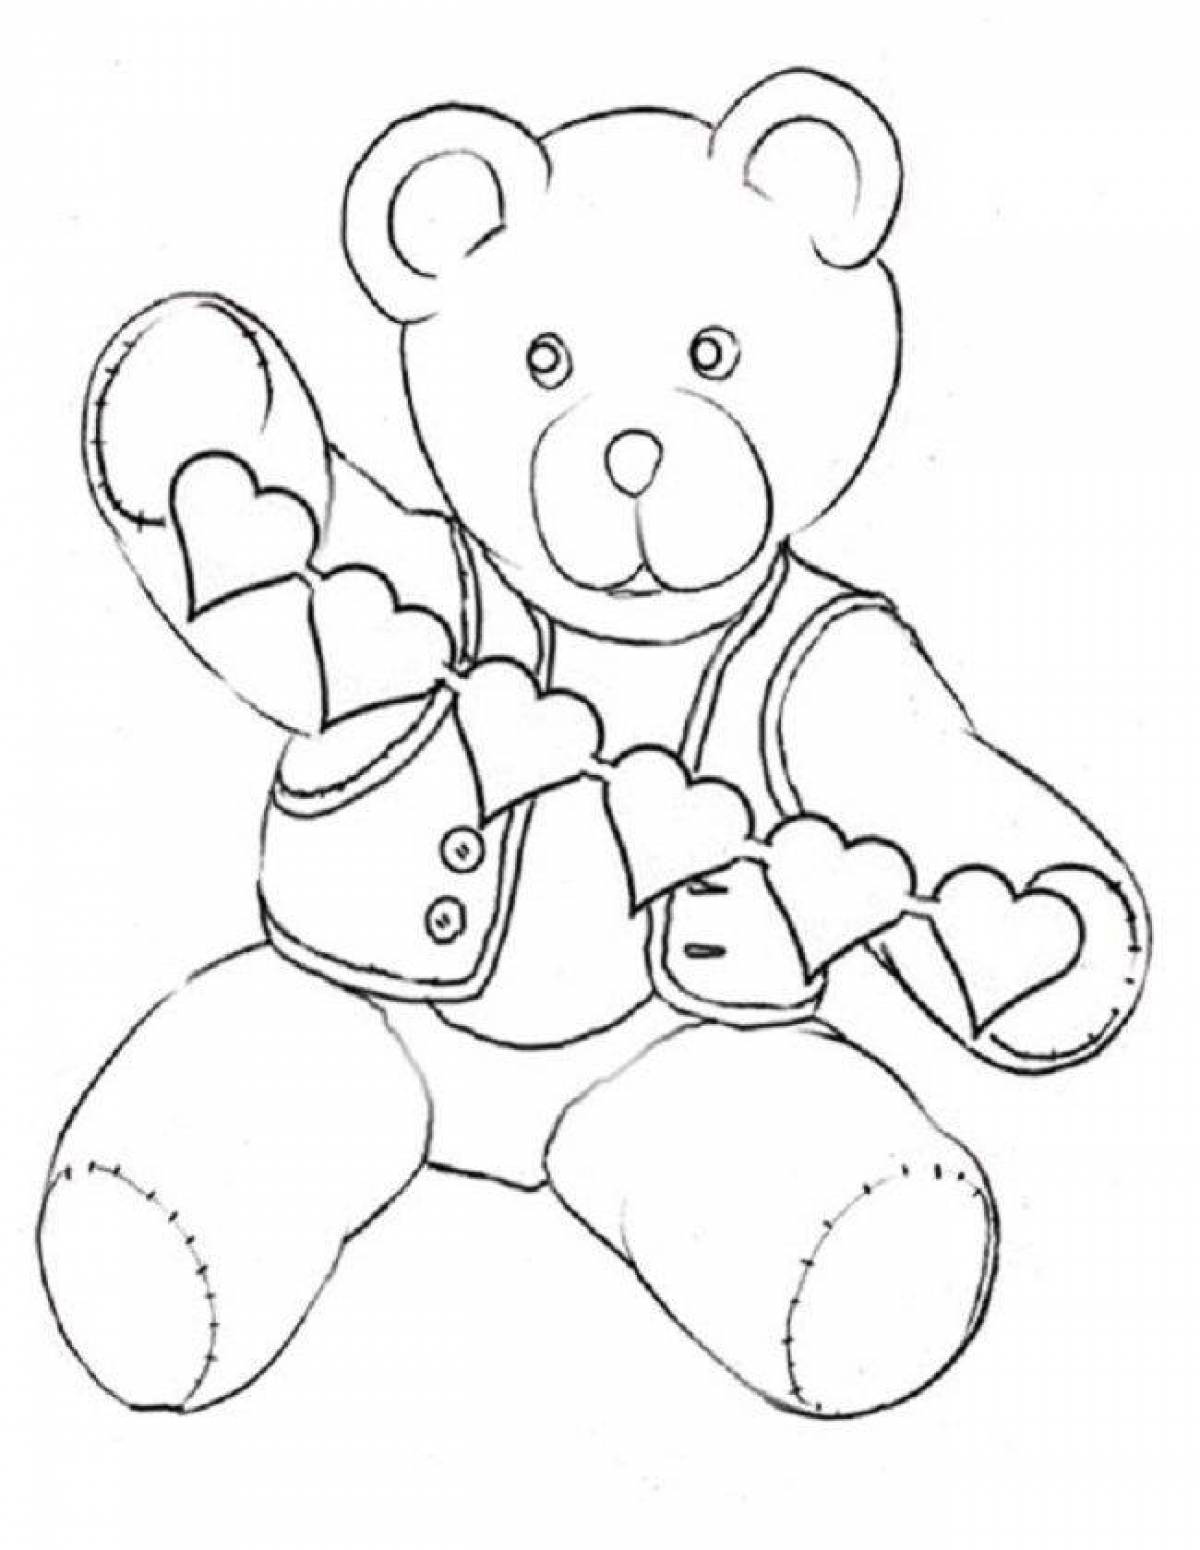 Coloring quirky teddy bear